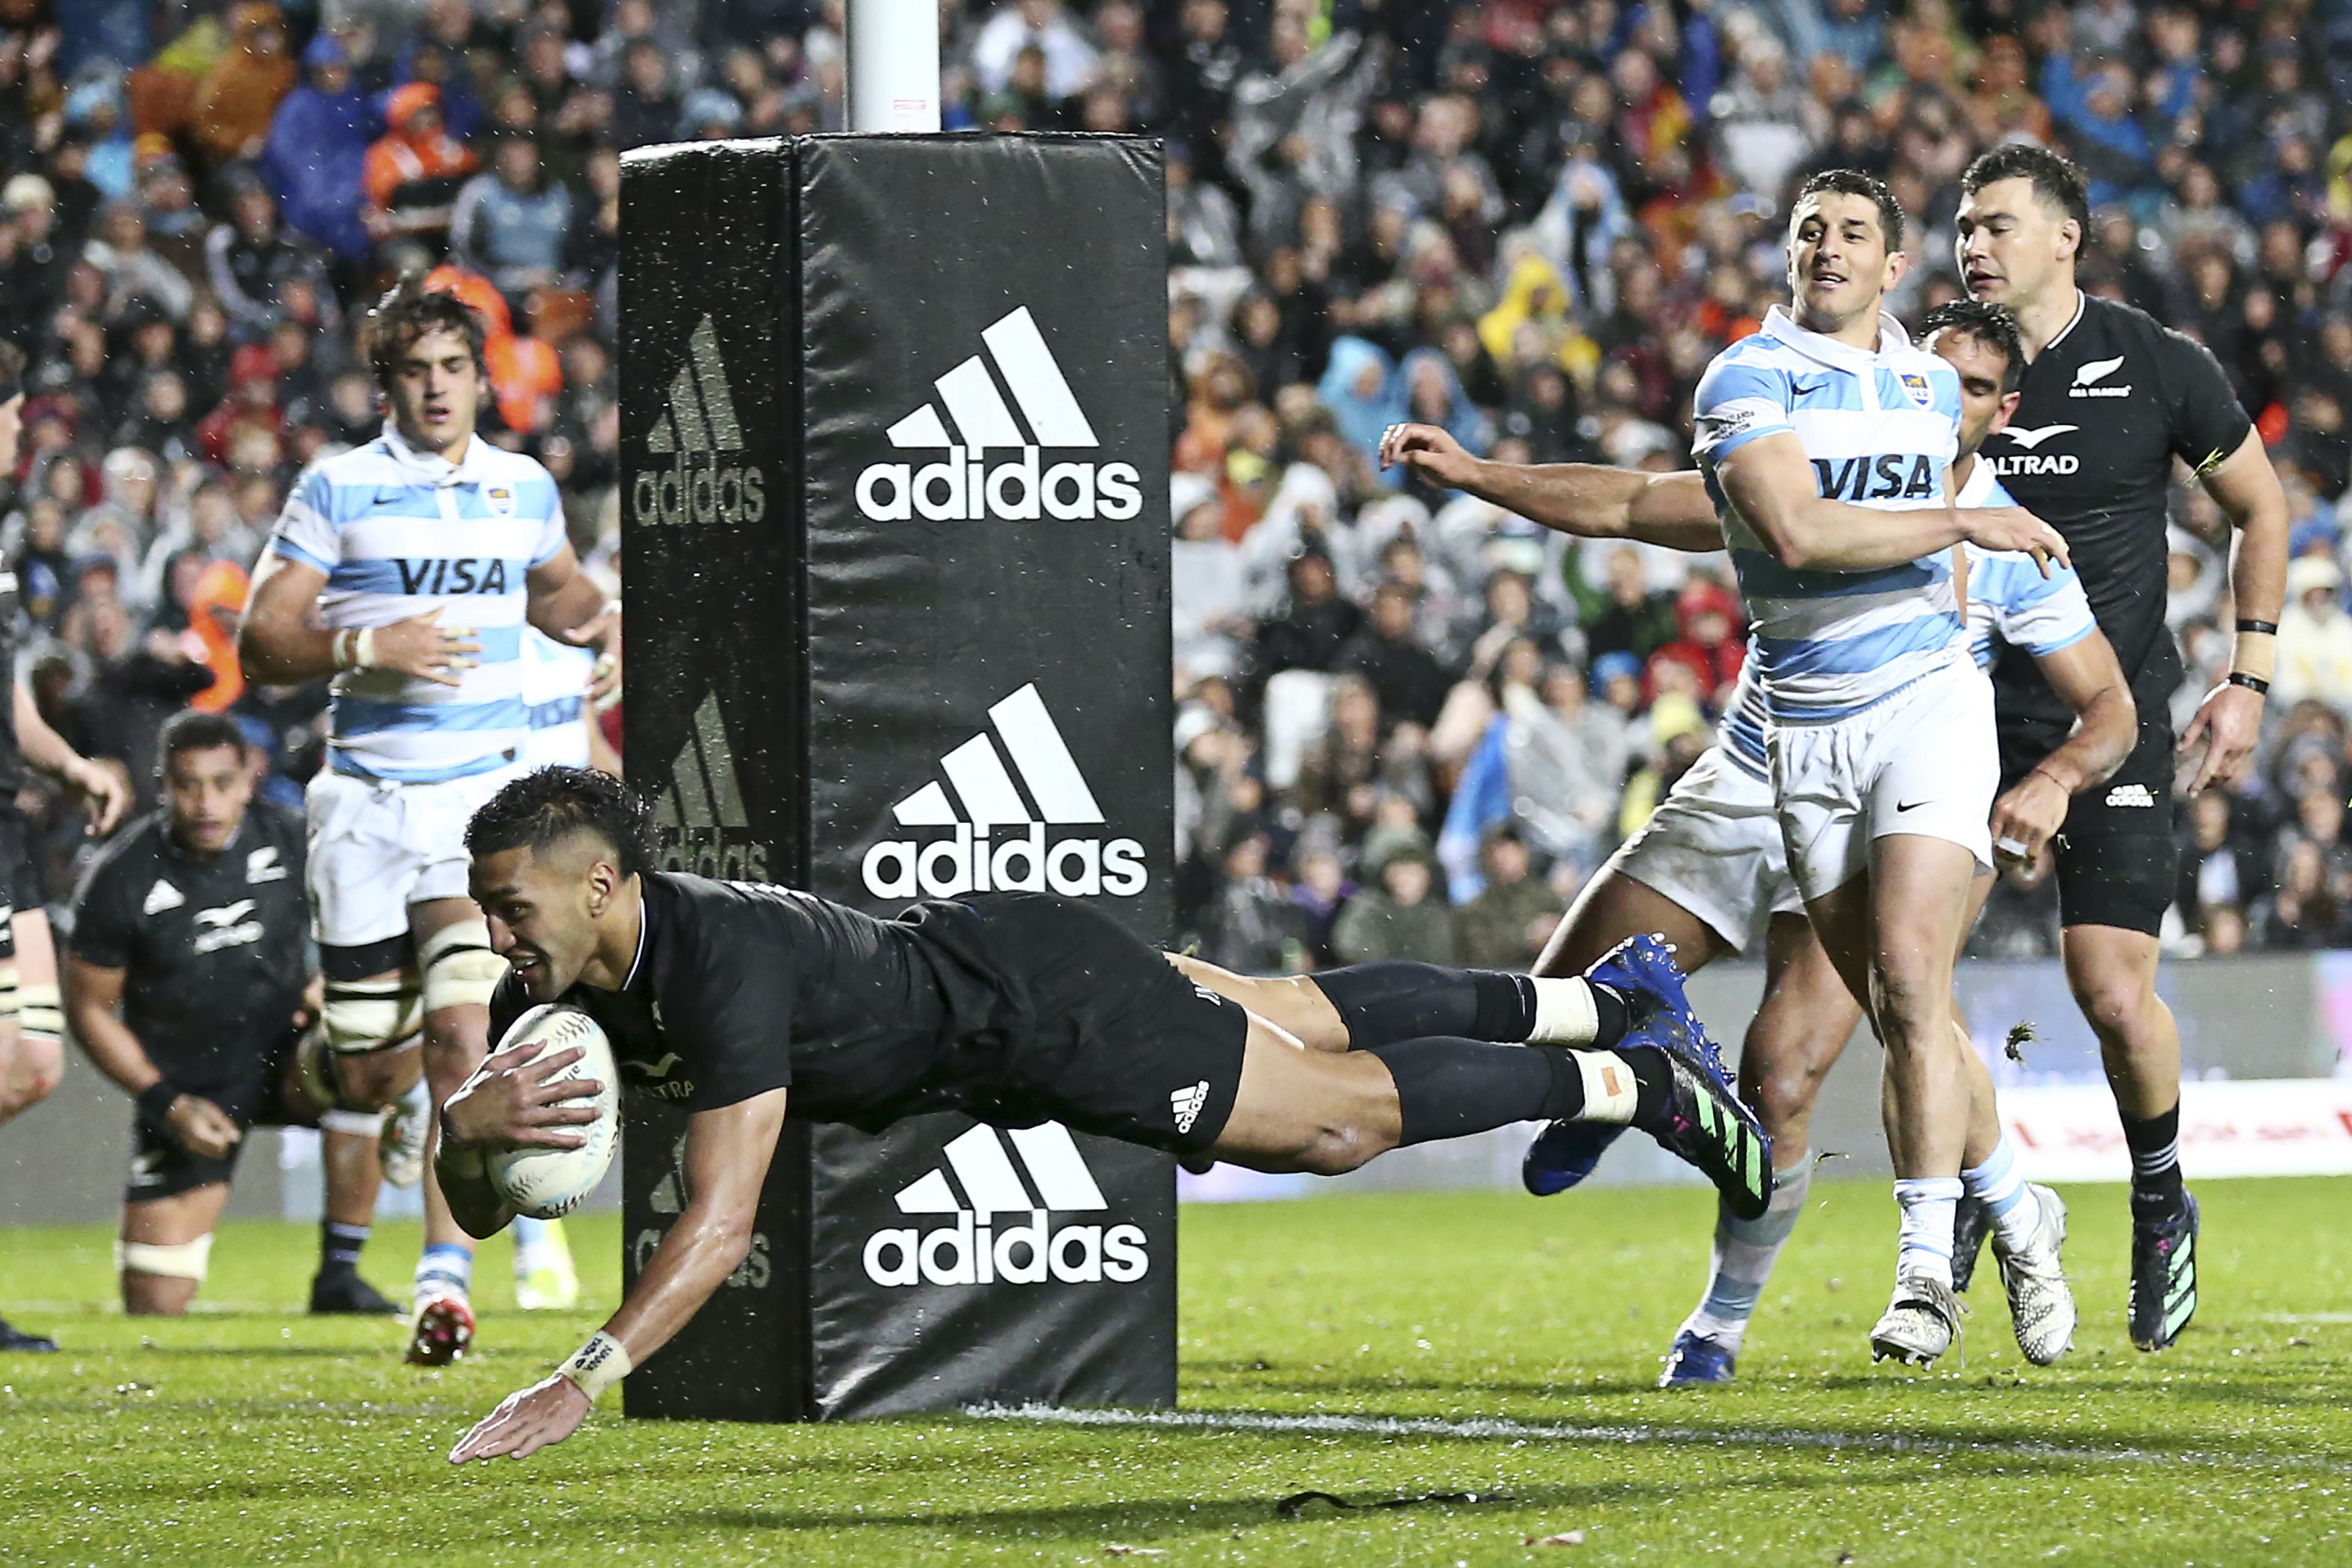 New Zealand's Rieko Ioane dives across the line to score a try.